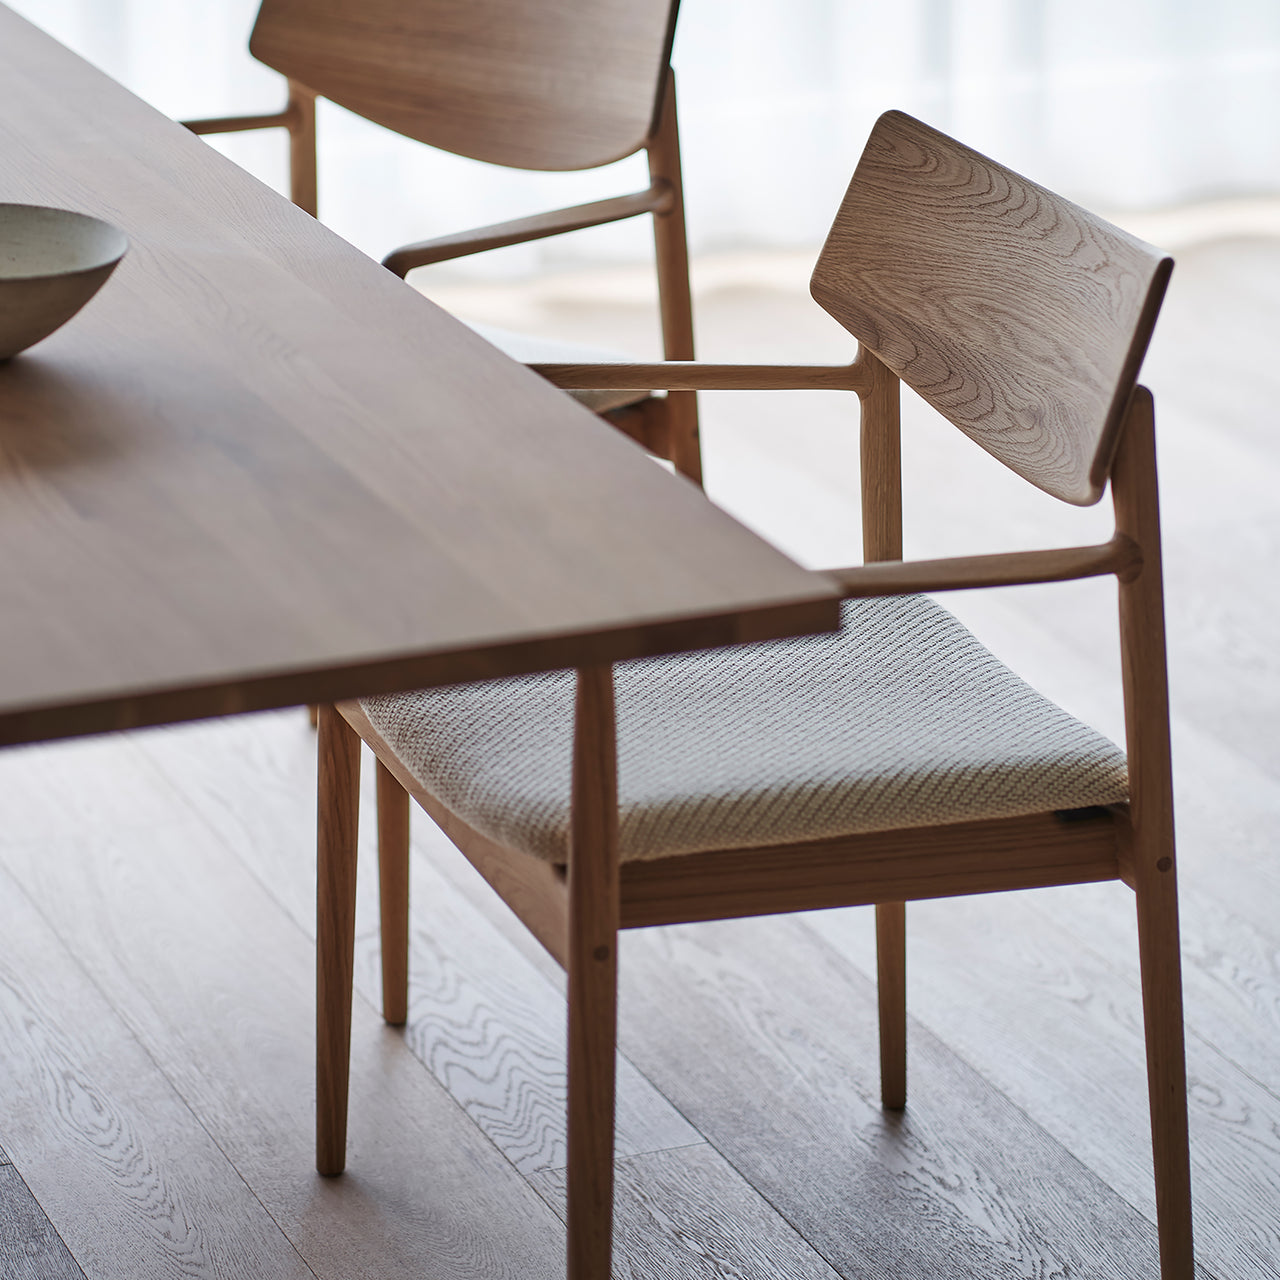 A-DC02 Dining Chair